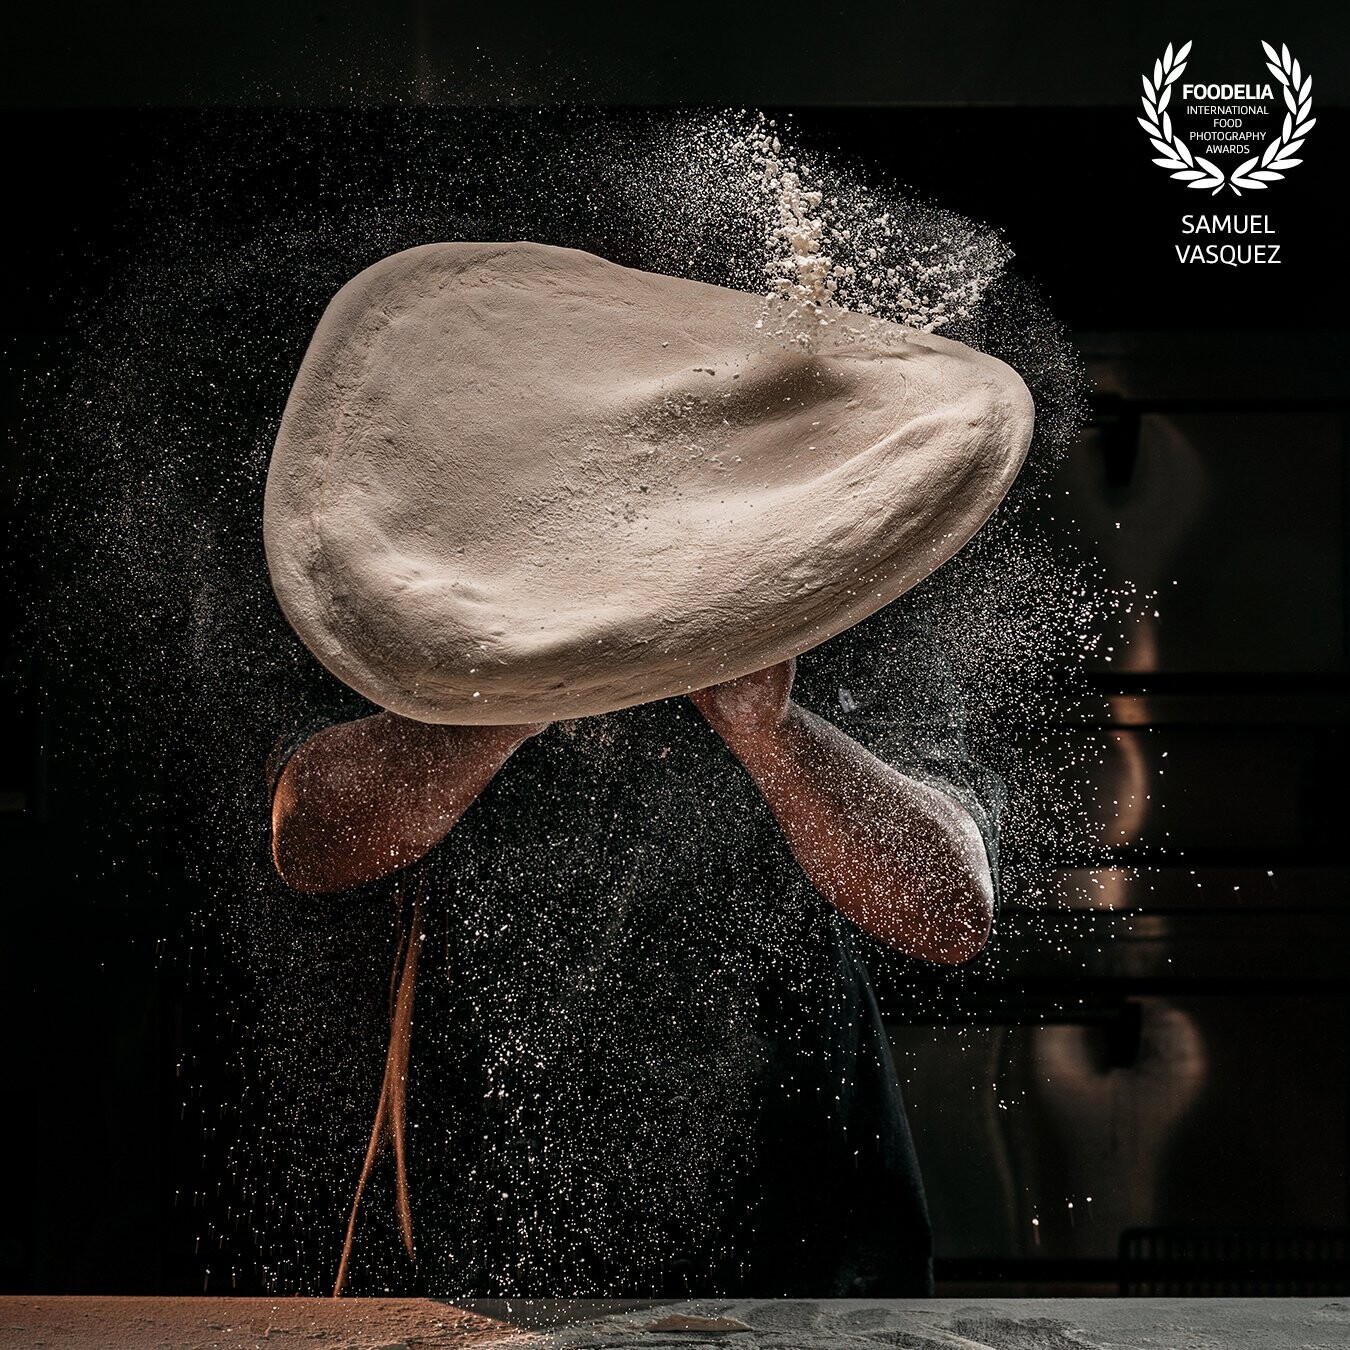 Created for Pizzarelli as part of their 40th Anniversary Campaign focusing on their fresh ingredients and dedicated preparation of each pizza pie. Lit with strobes to freeze the motion as well as an Arri Tungsten Fresnel for the warm rim.